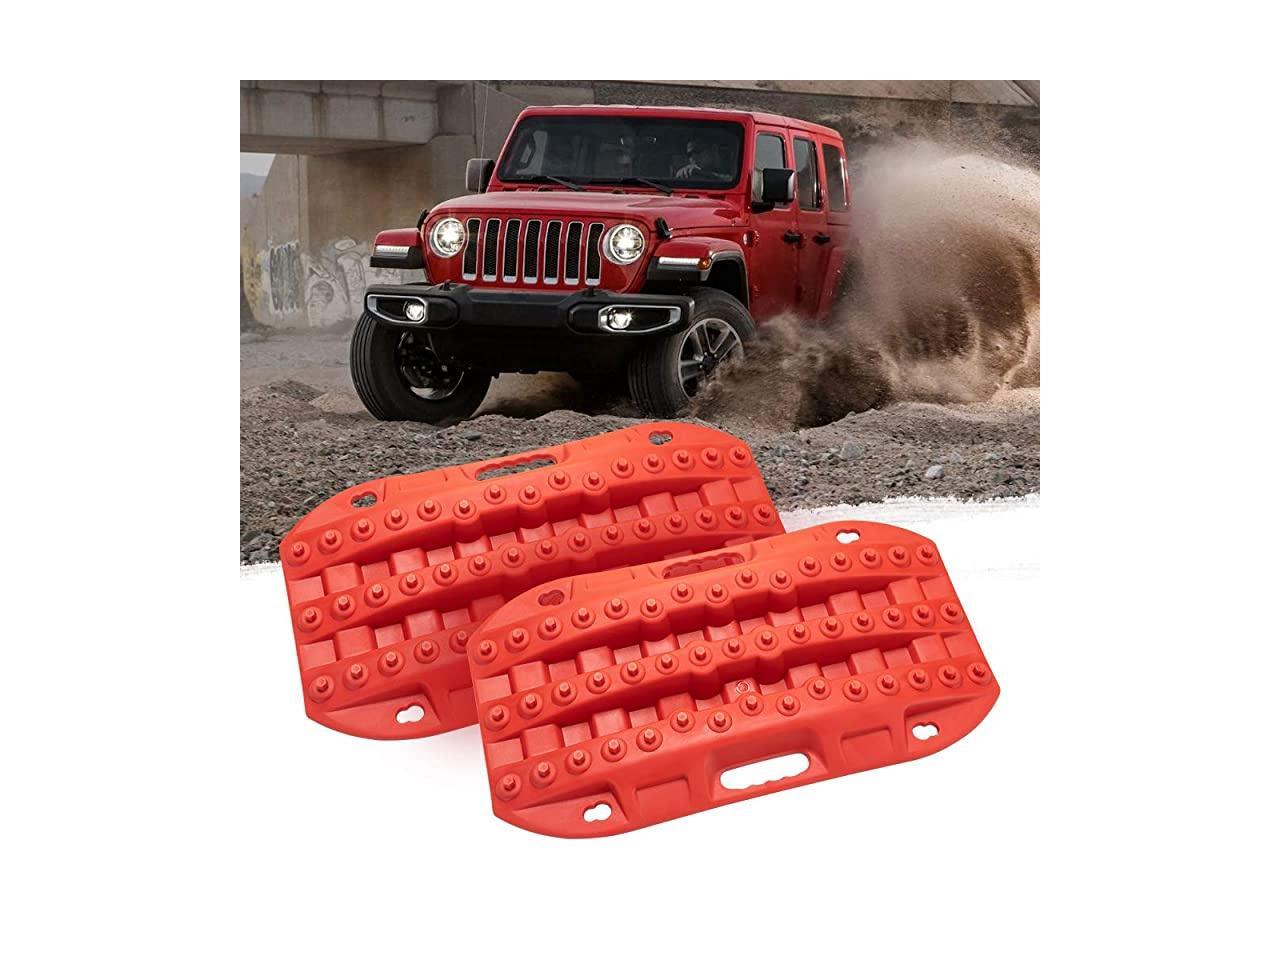 2Pcs Recovery Boards Traction Tracks Mat Car Non-Slip Mats Tire Aid Fit for 4X4 Jeep Mud Sand Snow Vehicle Red Tire Traction Tool EBESTauto Off-Road Traction Boards 